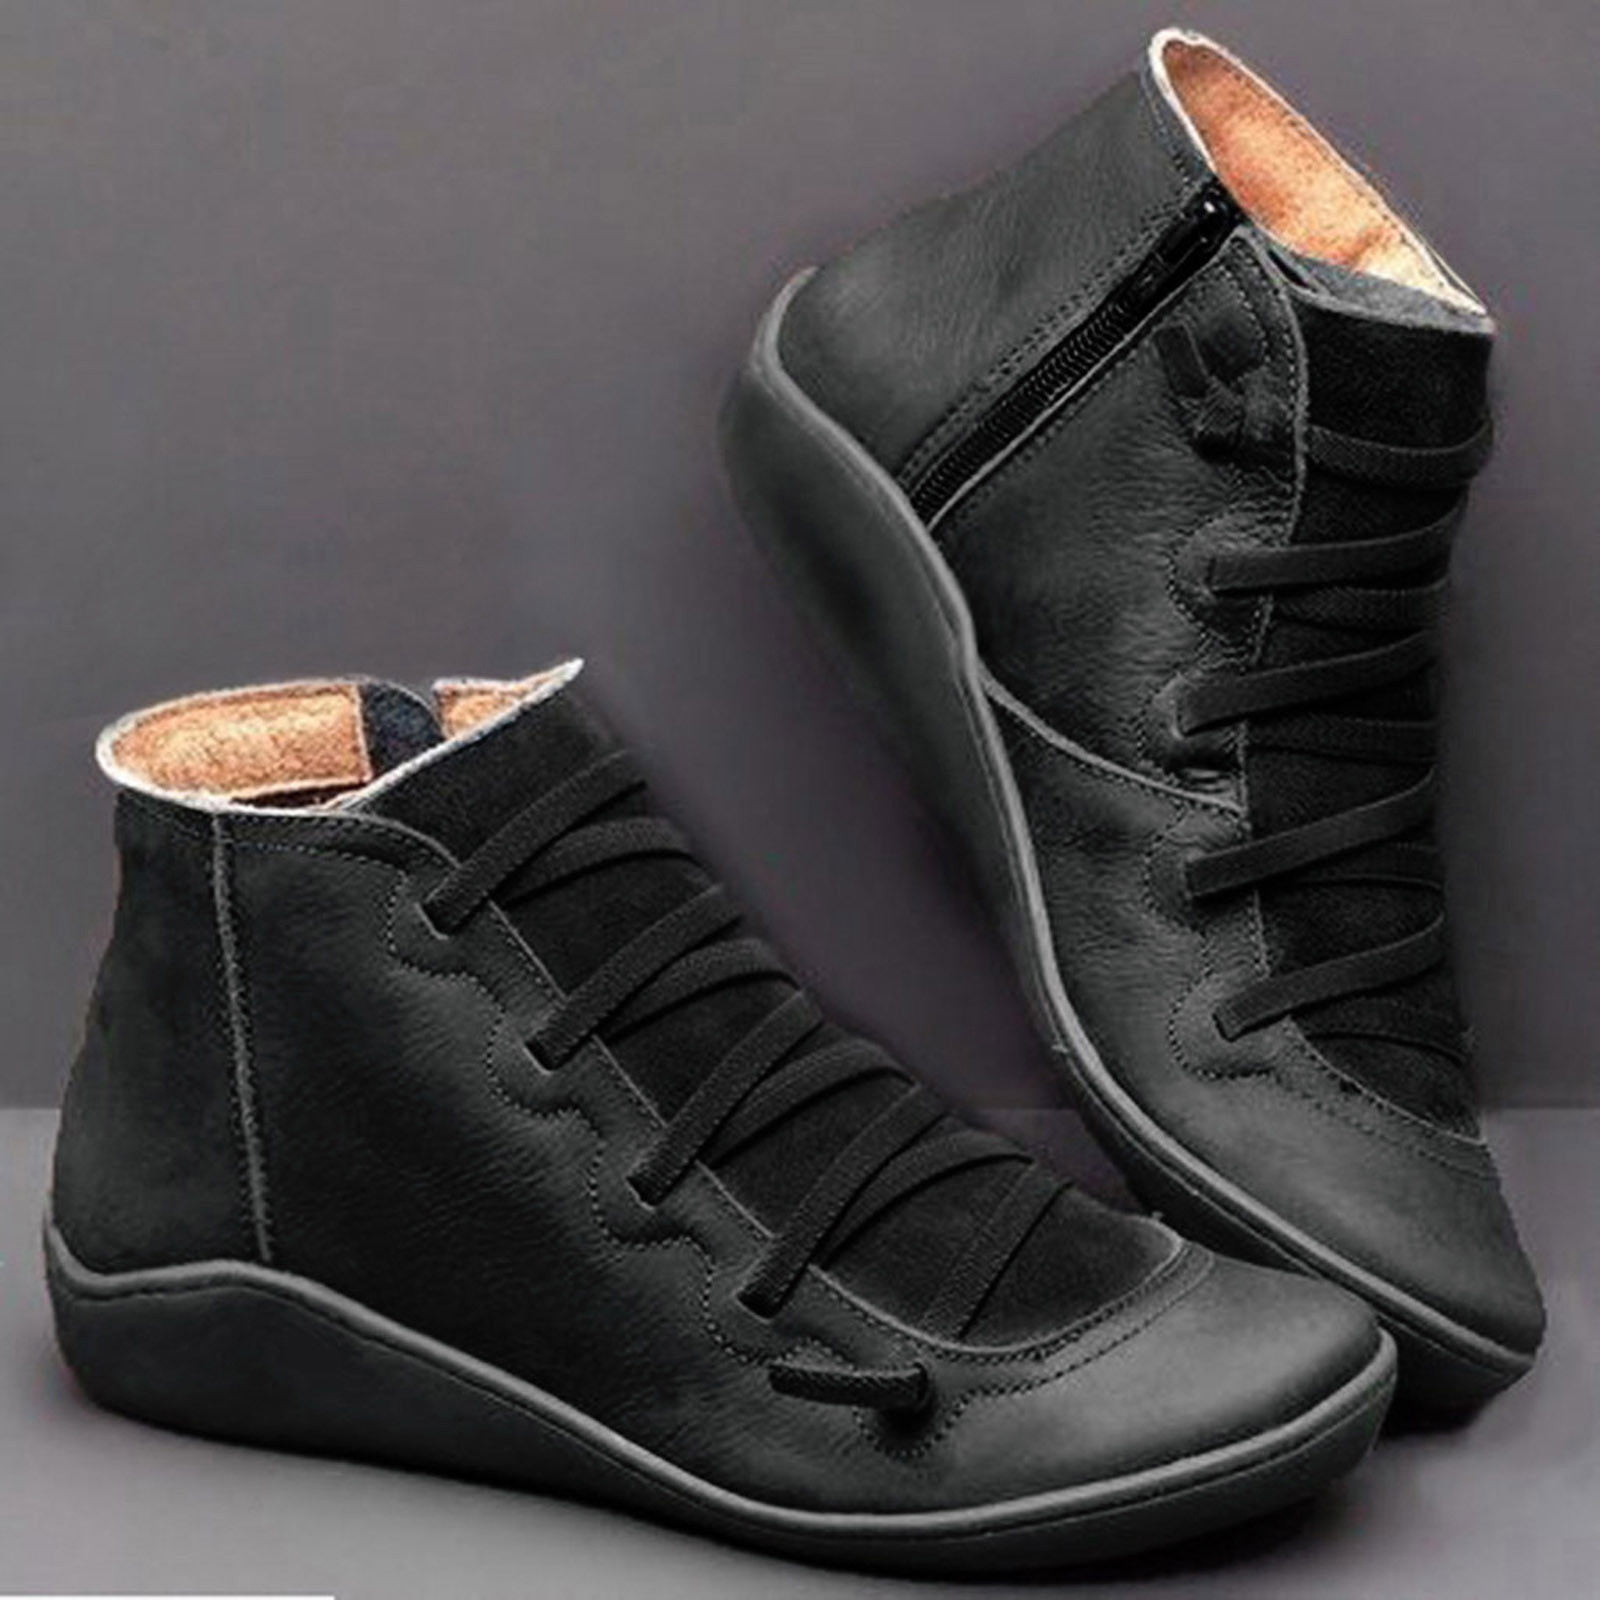 AXXD Low-heeled Ankle Boots,Flat Girl Ladies Duck Boots Platform Boots ...